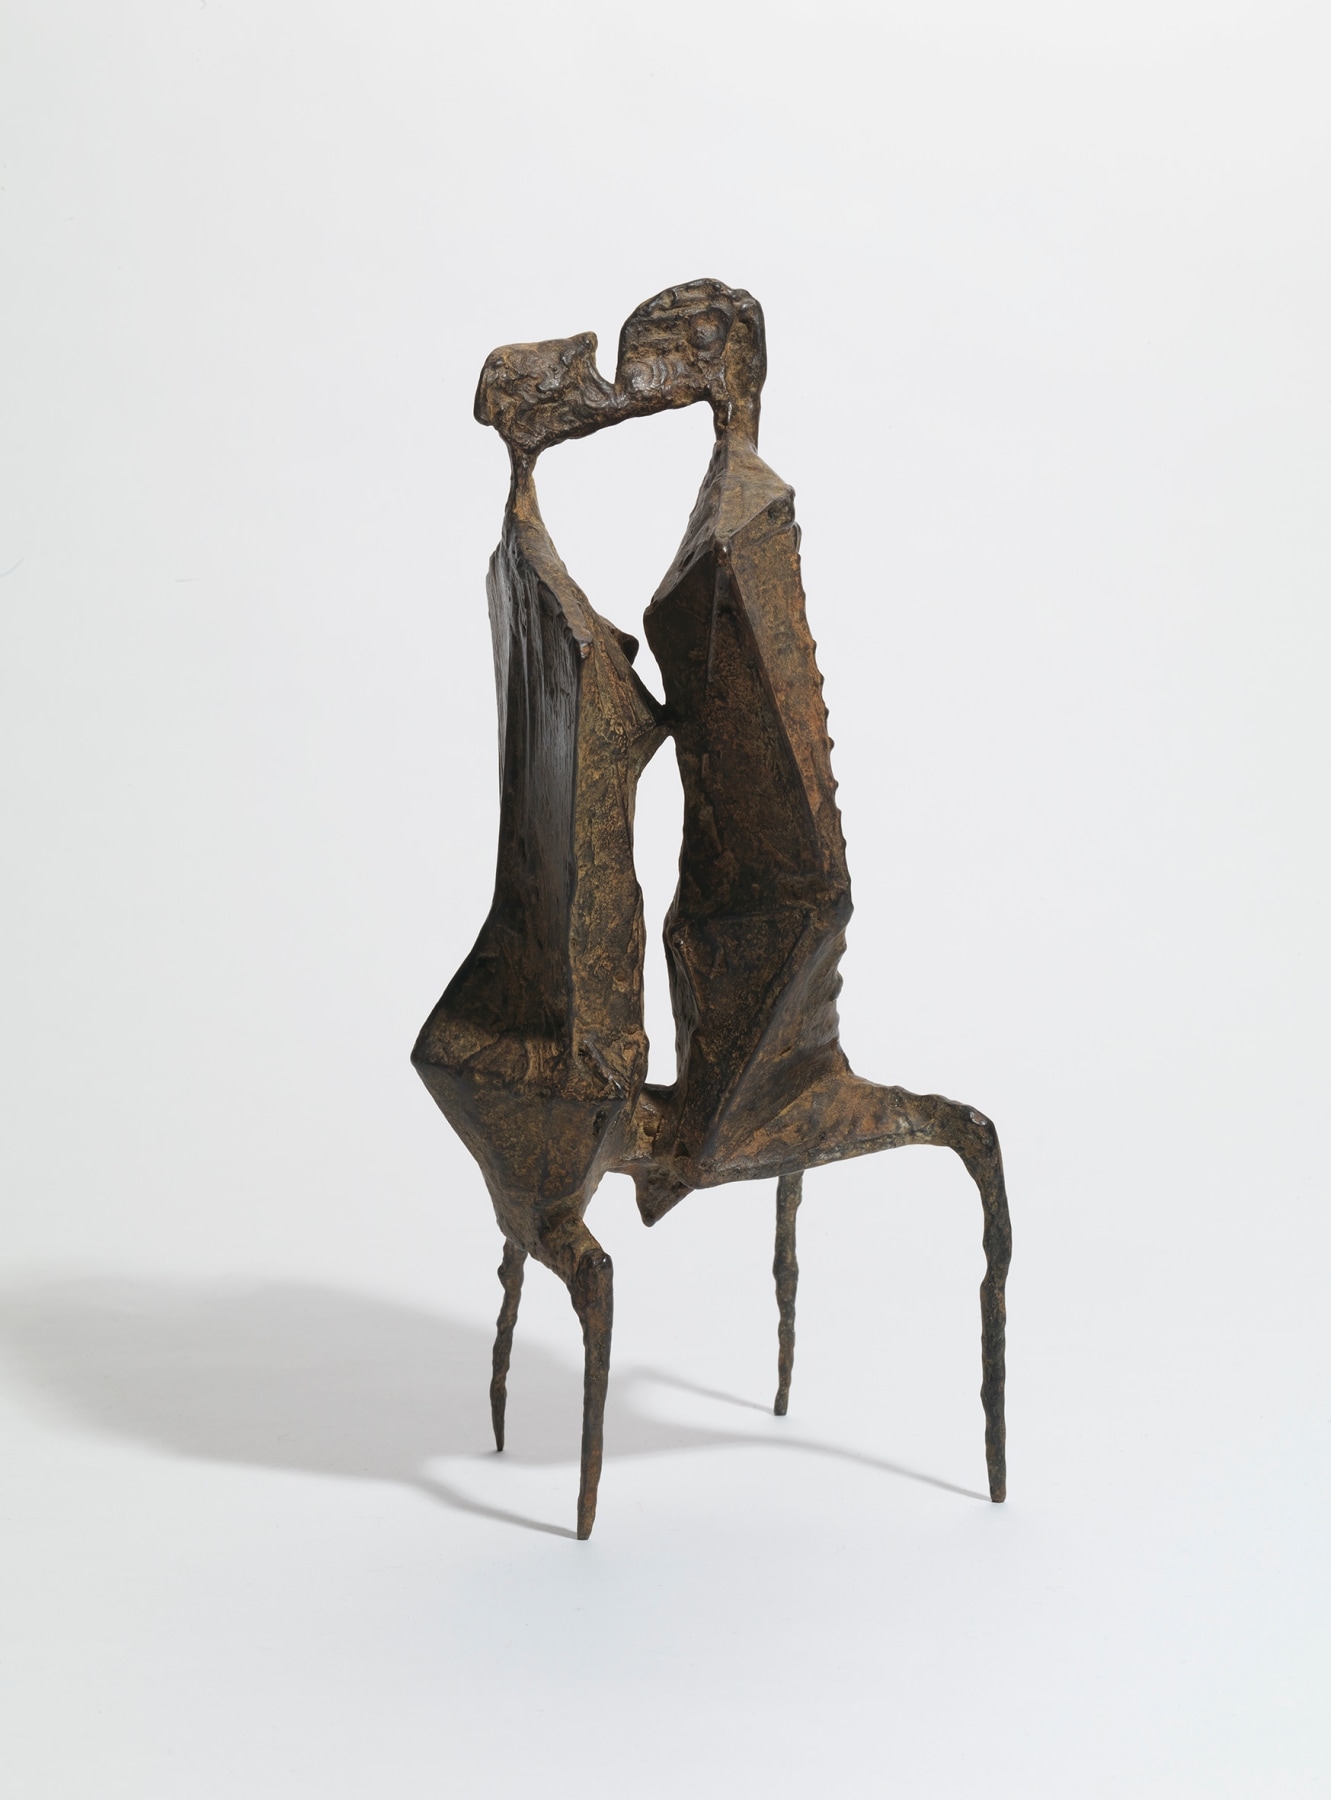 Lynn Chadwick, Two Figures, 1954,  Bronze, 31 by 14 by 15 cm (12 &frac14; by 5 &frac12; by 5 ⅞ in.)